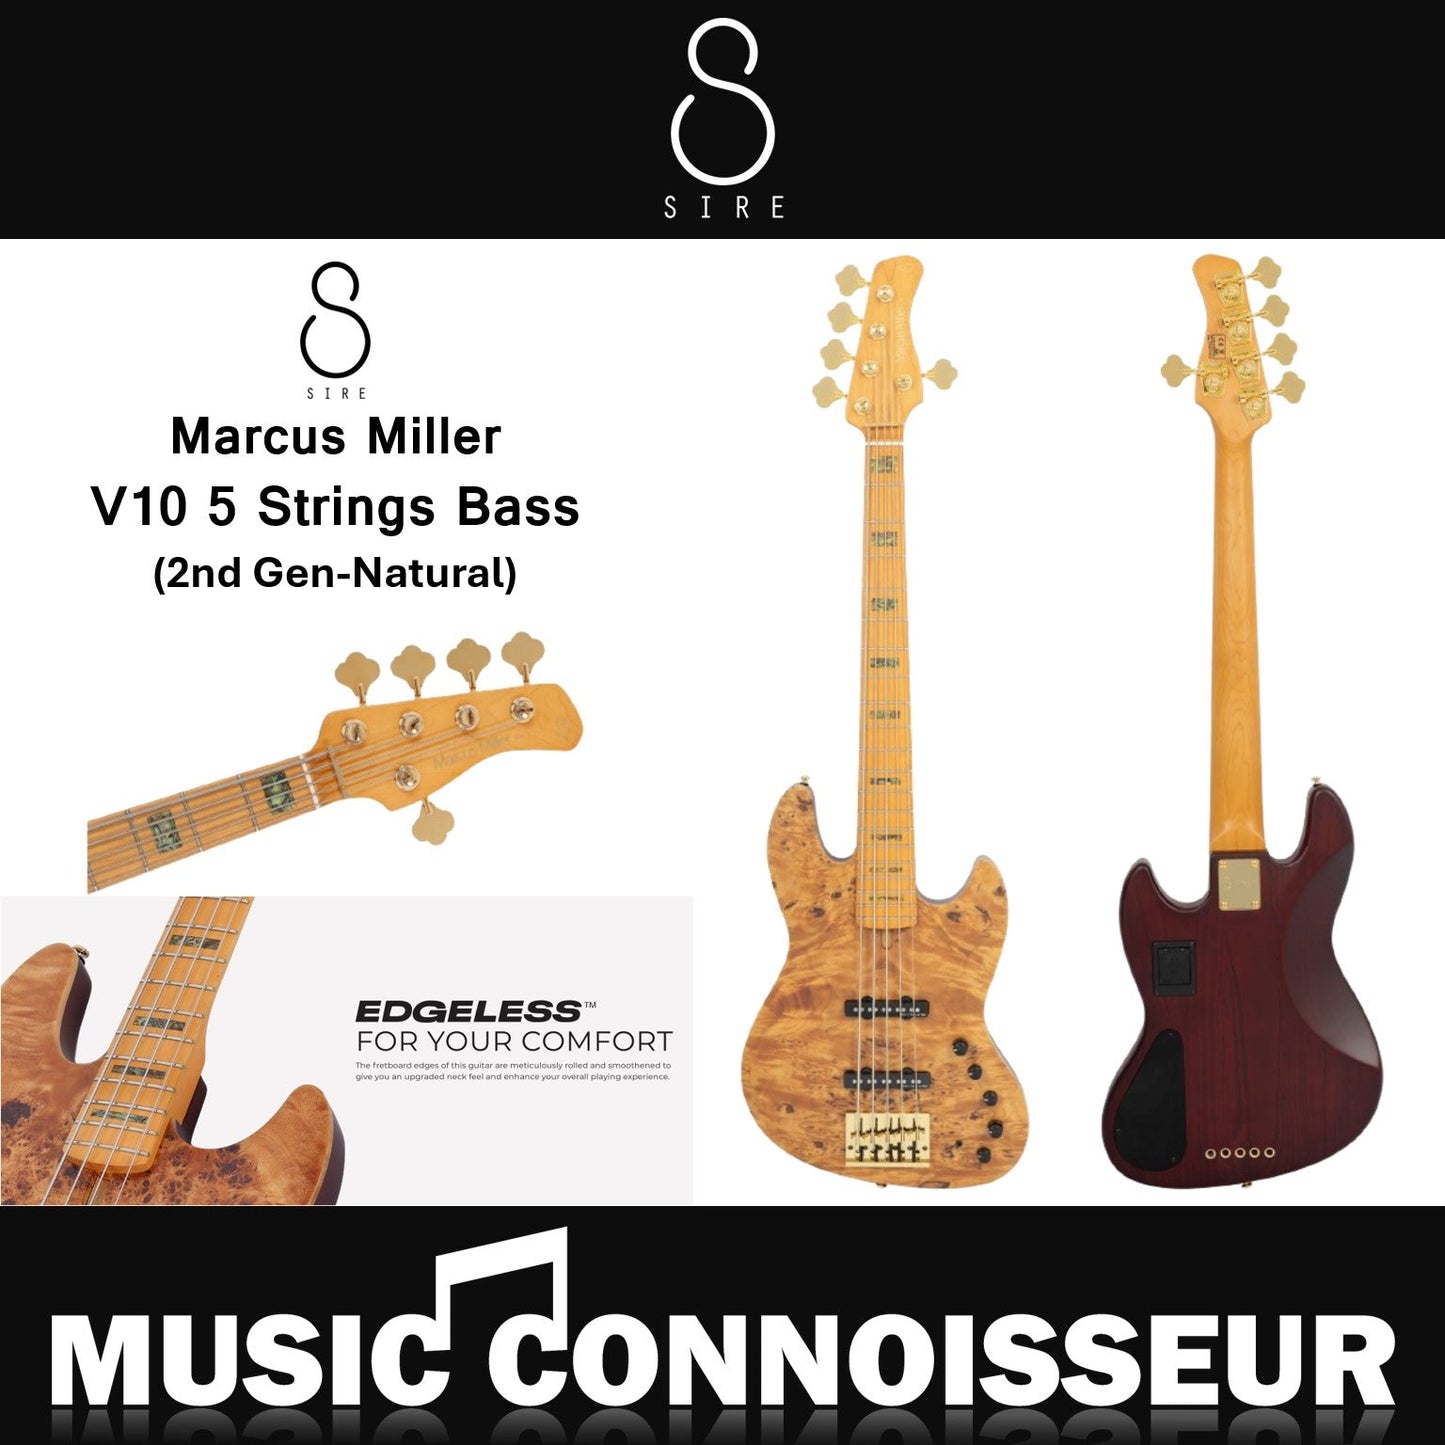 Sire Marcus Miller V10 5 Strings Bass (2nd Gen - Natural)